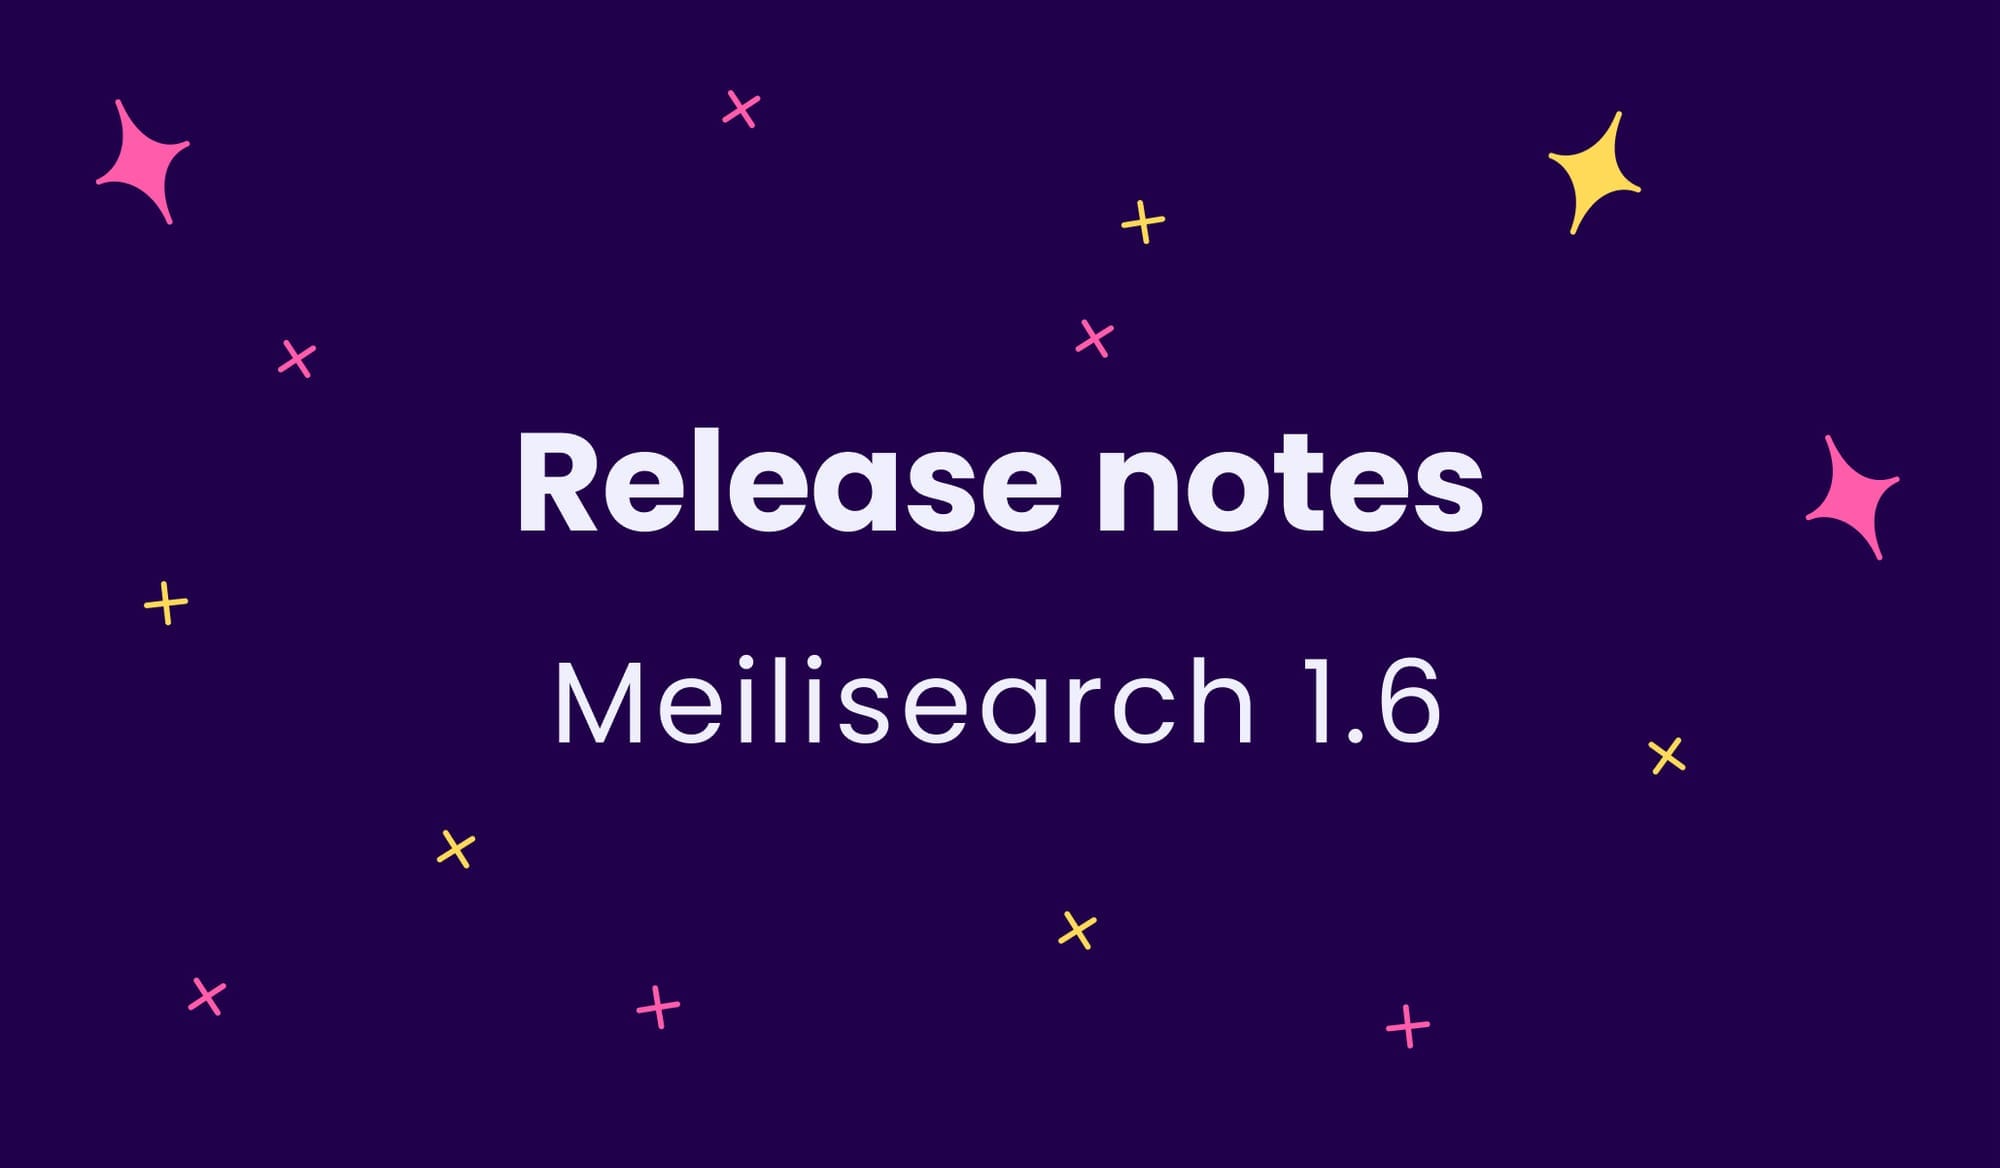 Meilisearch 1.6 release notes